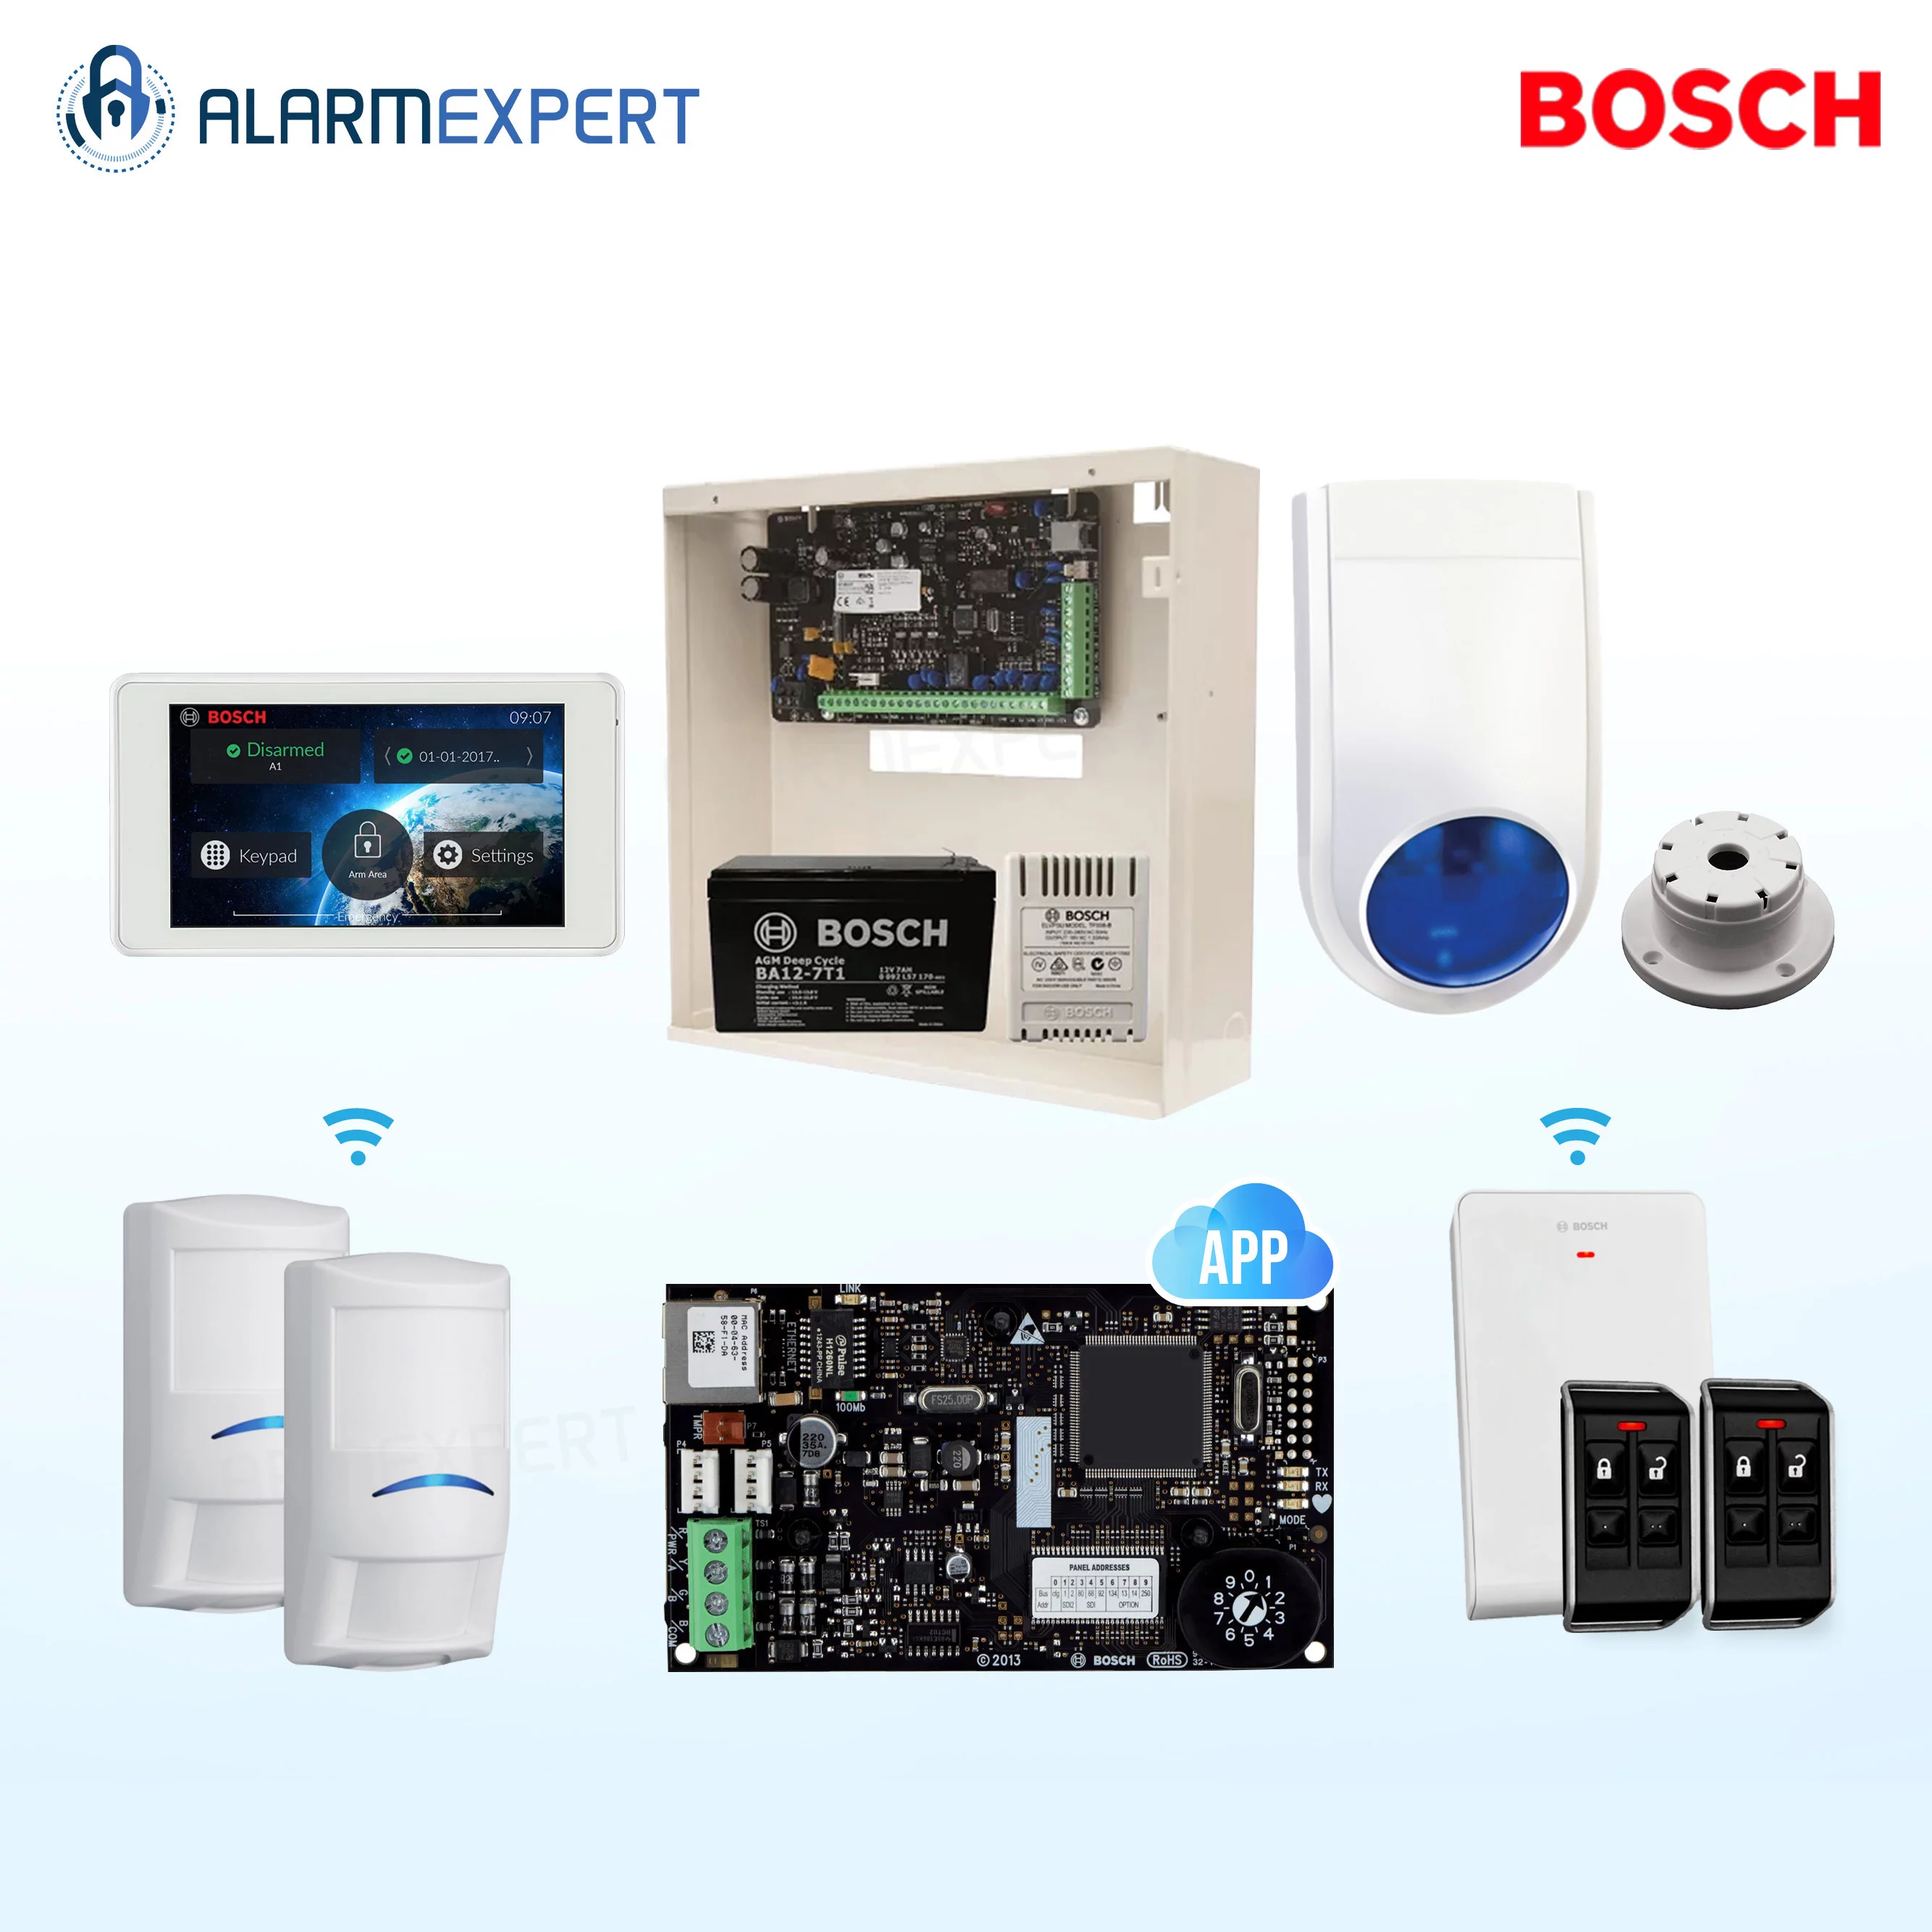 Bosch Solution 3000-IP + 2 Wireless PIRs + 5" Touch screen Keypad + Receiver With 2 Deluxe Remotes